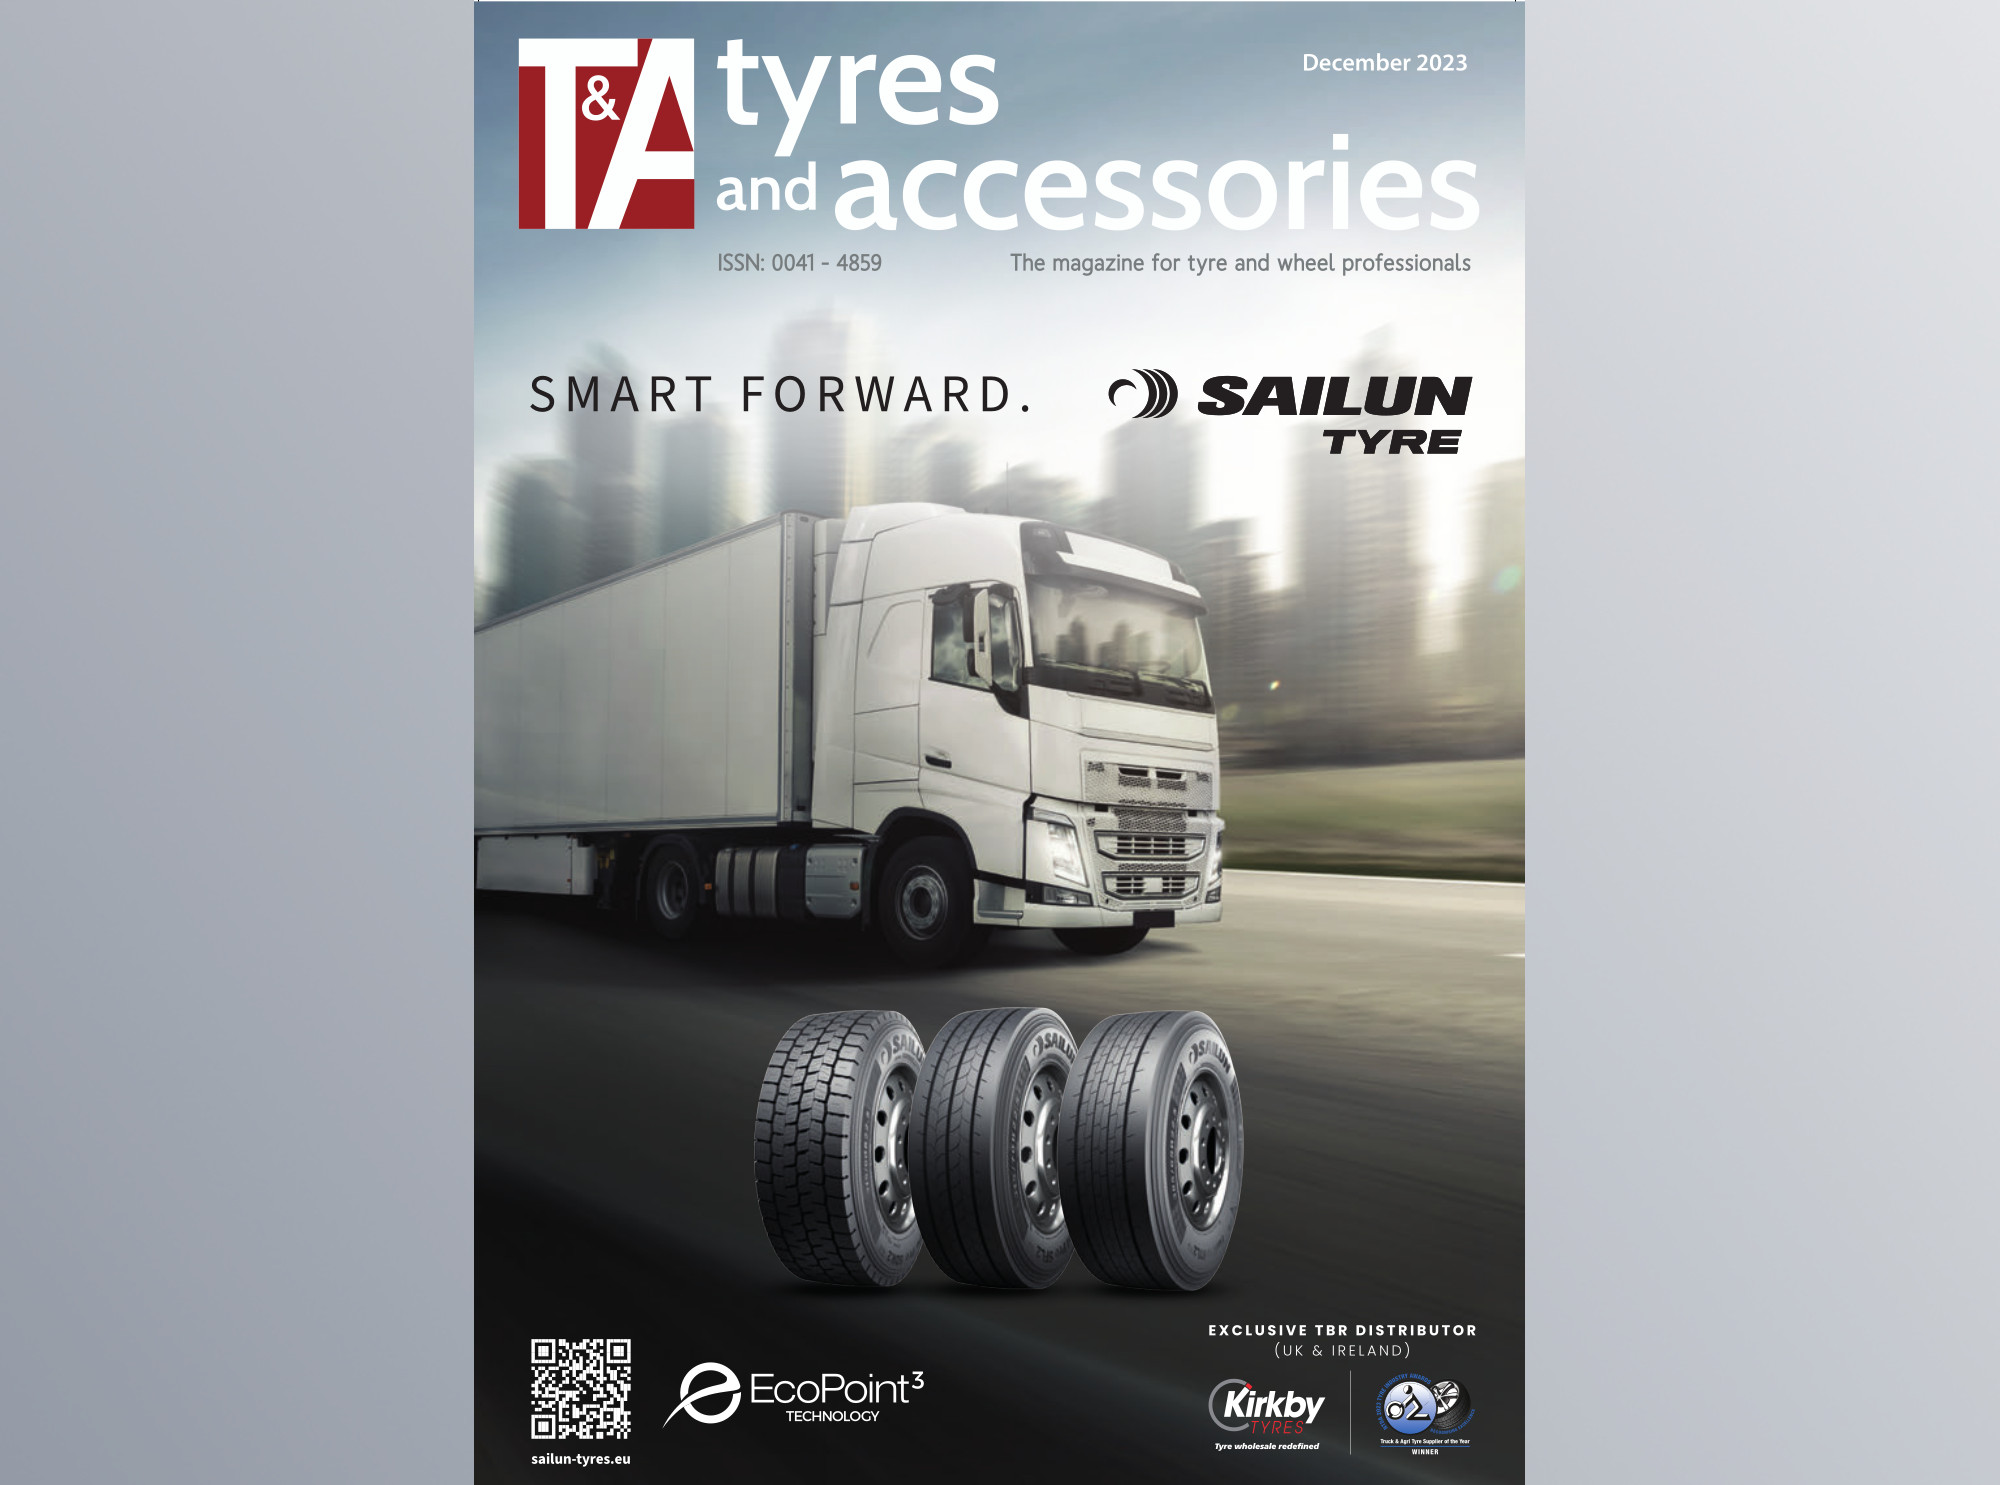 Tyres & Accessories December 2023 issue available to read online now